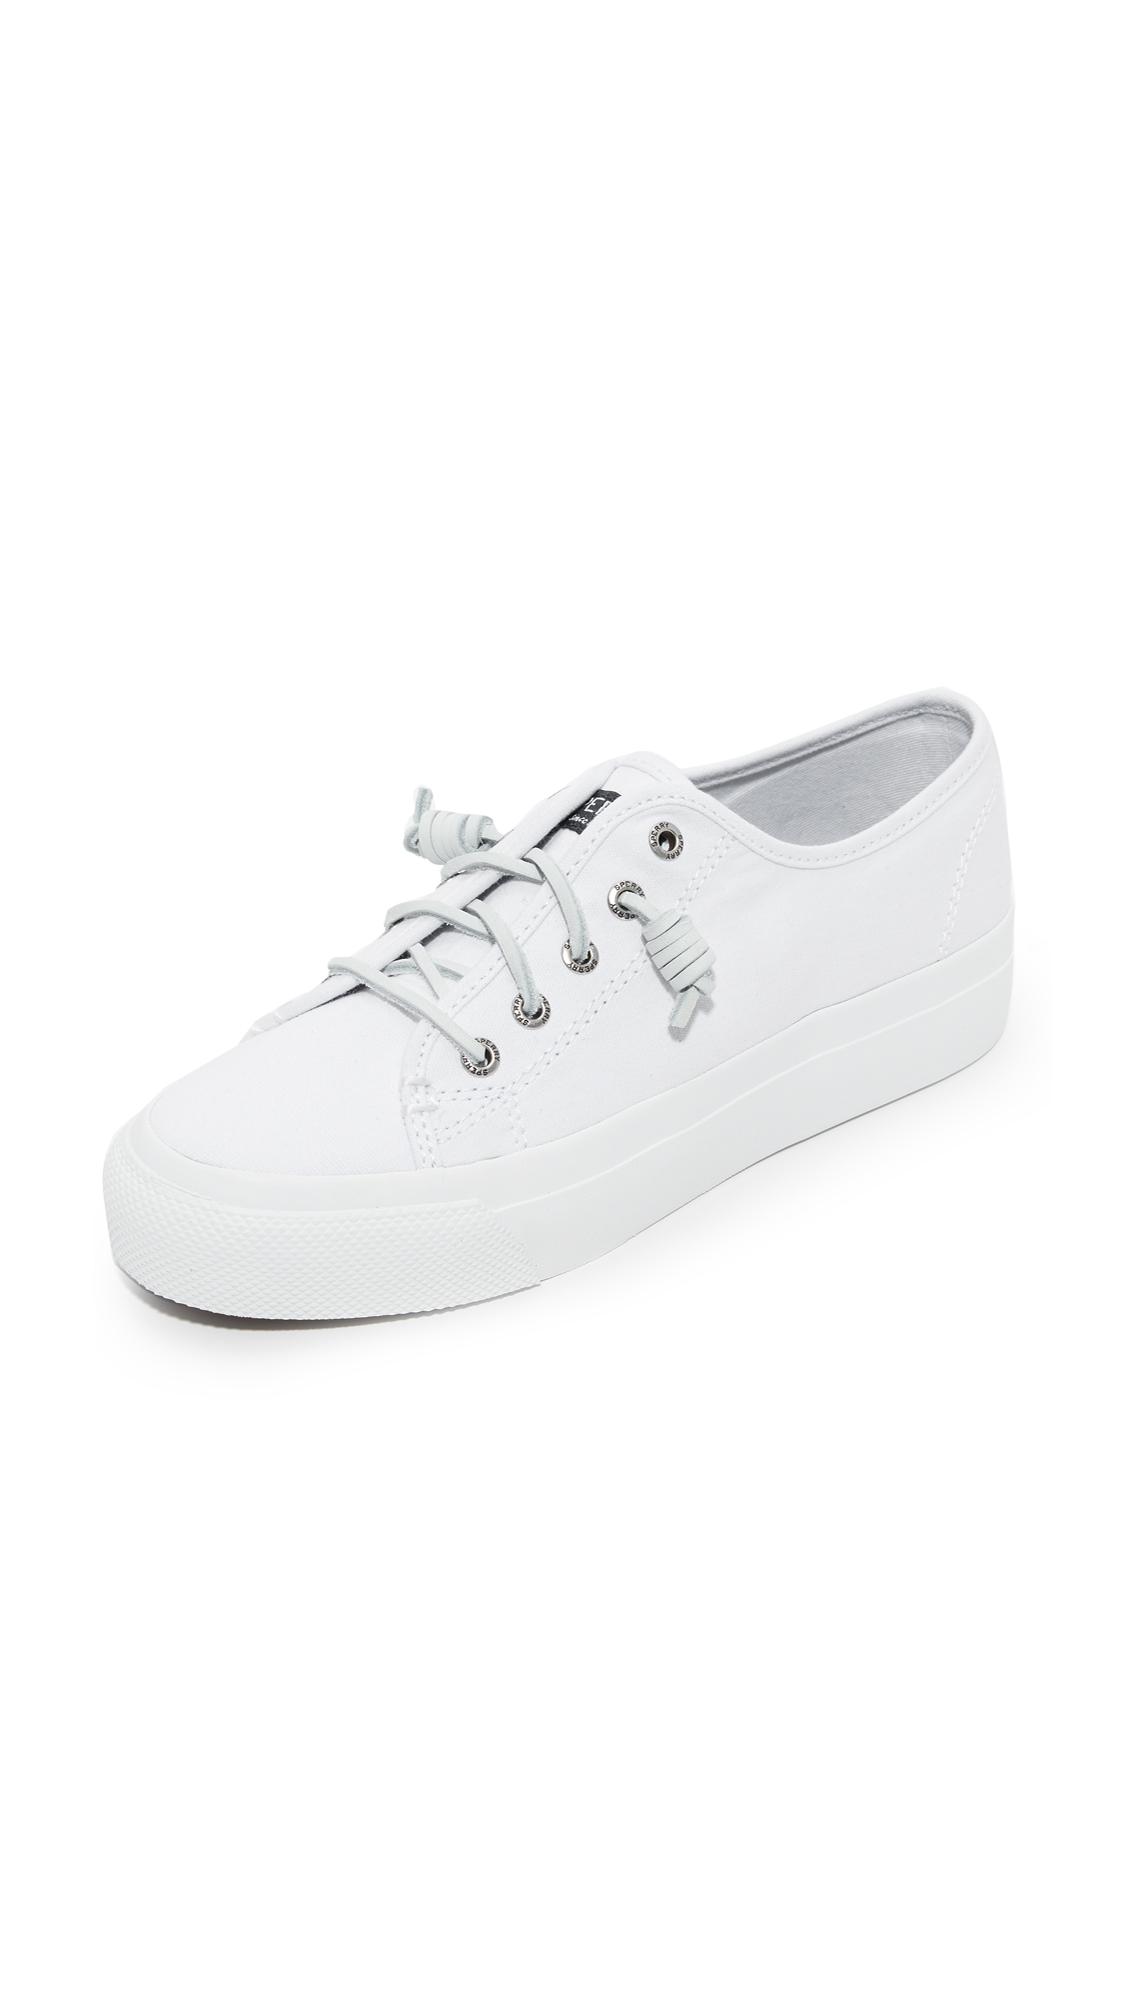 Sperry top-sider Sky Sail Platform Sneakers in White | Lyst